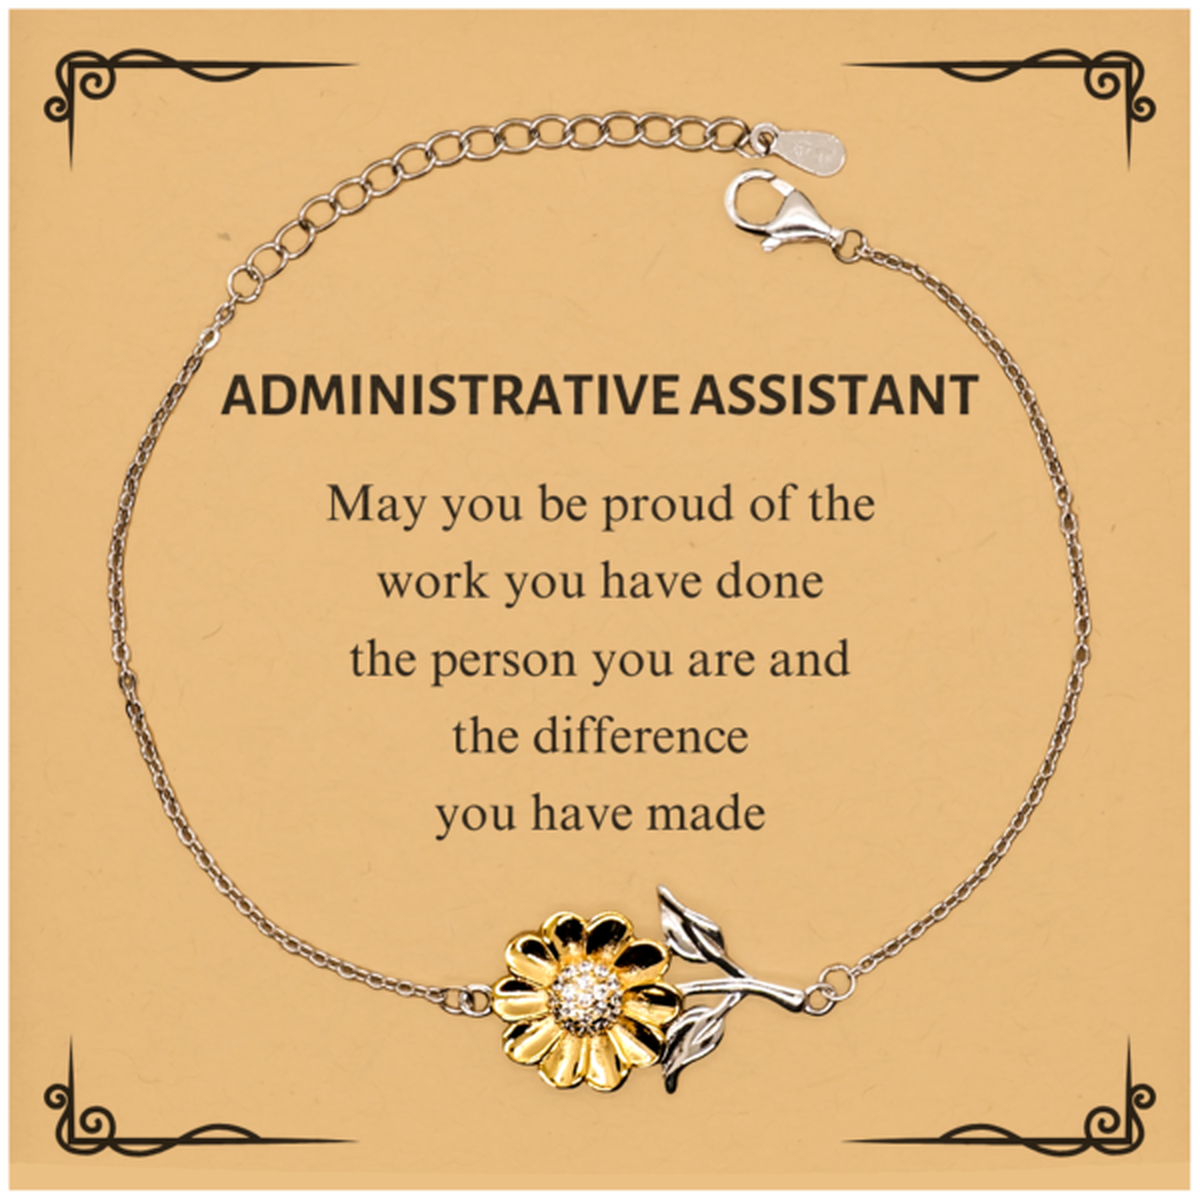 Administrative Assistant May you be proud of the work you have done, Retirement Administrative Assistant Sunflower Bracelet for Colleague Appreciation Gifts Amazing for Administrative Assistant